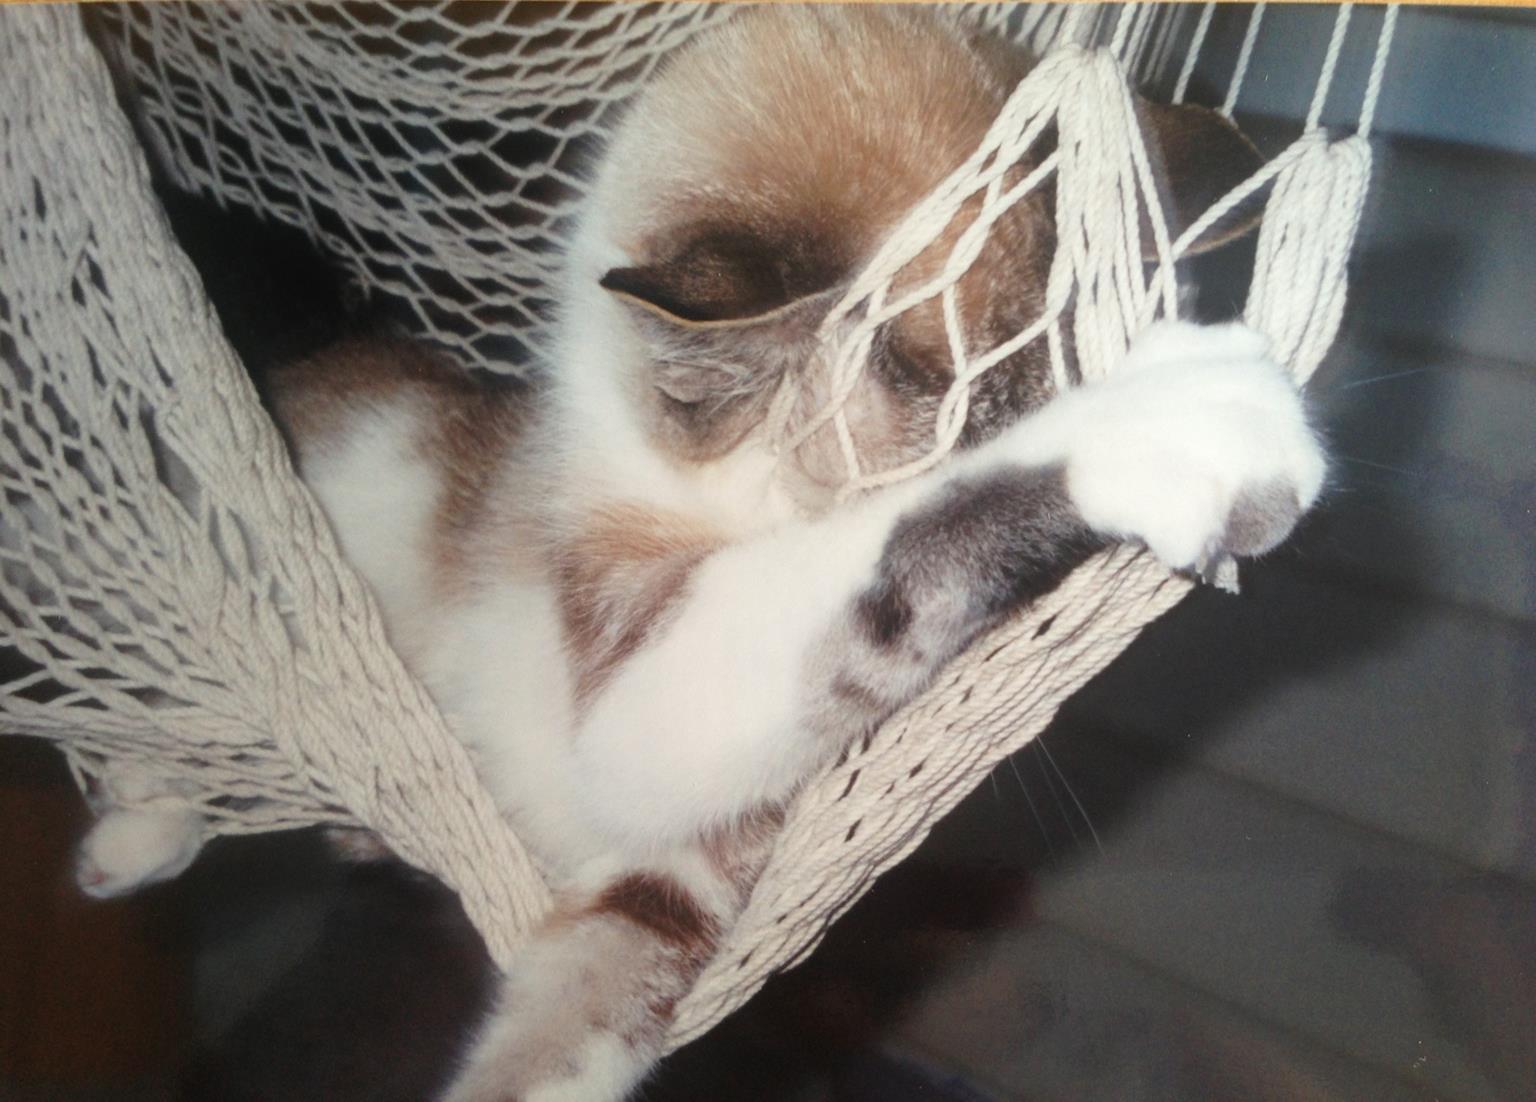 This cat loved our hammock swing! Got "stuck" but not really, just playing.